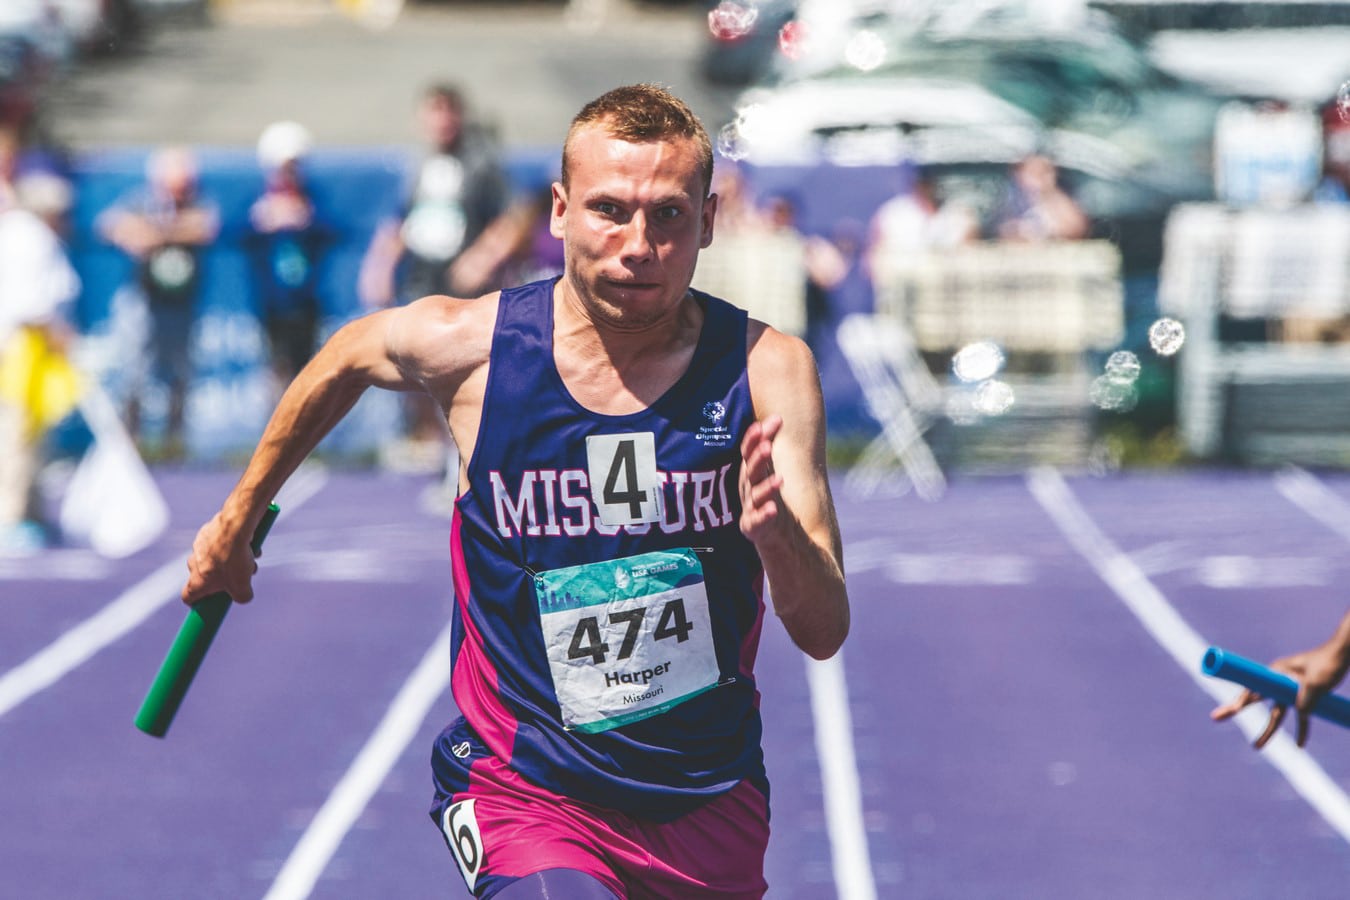 A track and field athlete in pink and purple Team Missouri attire runs toward the camera while holding a baton and eyes wide with a strained facial expression